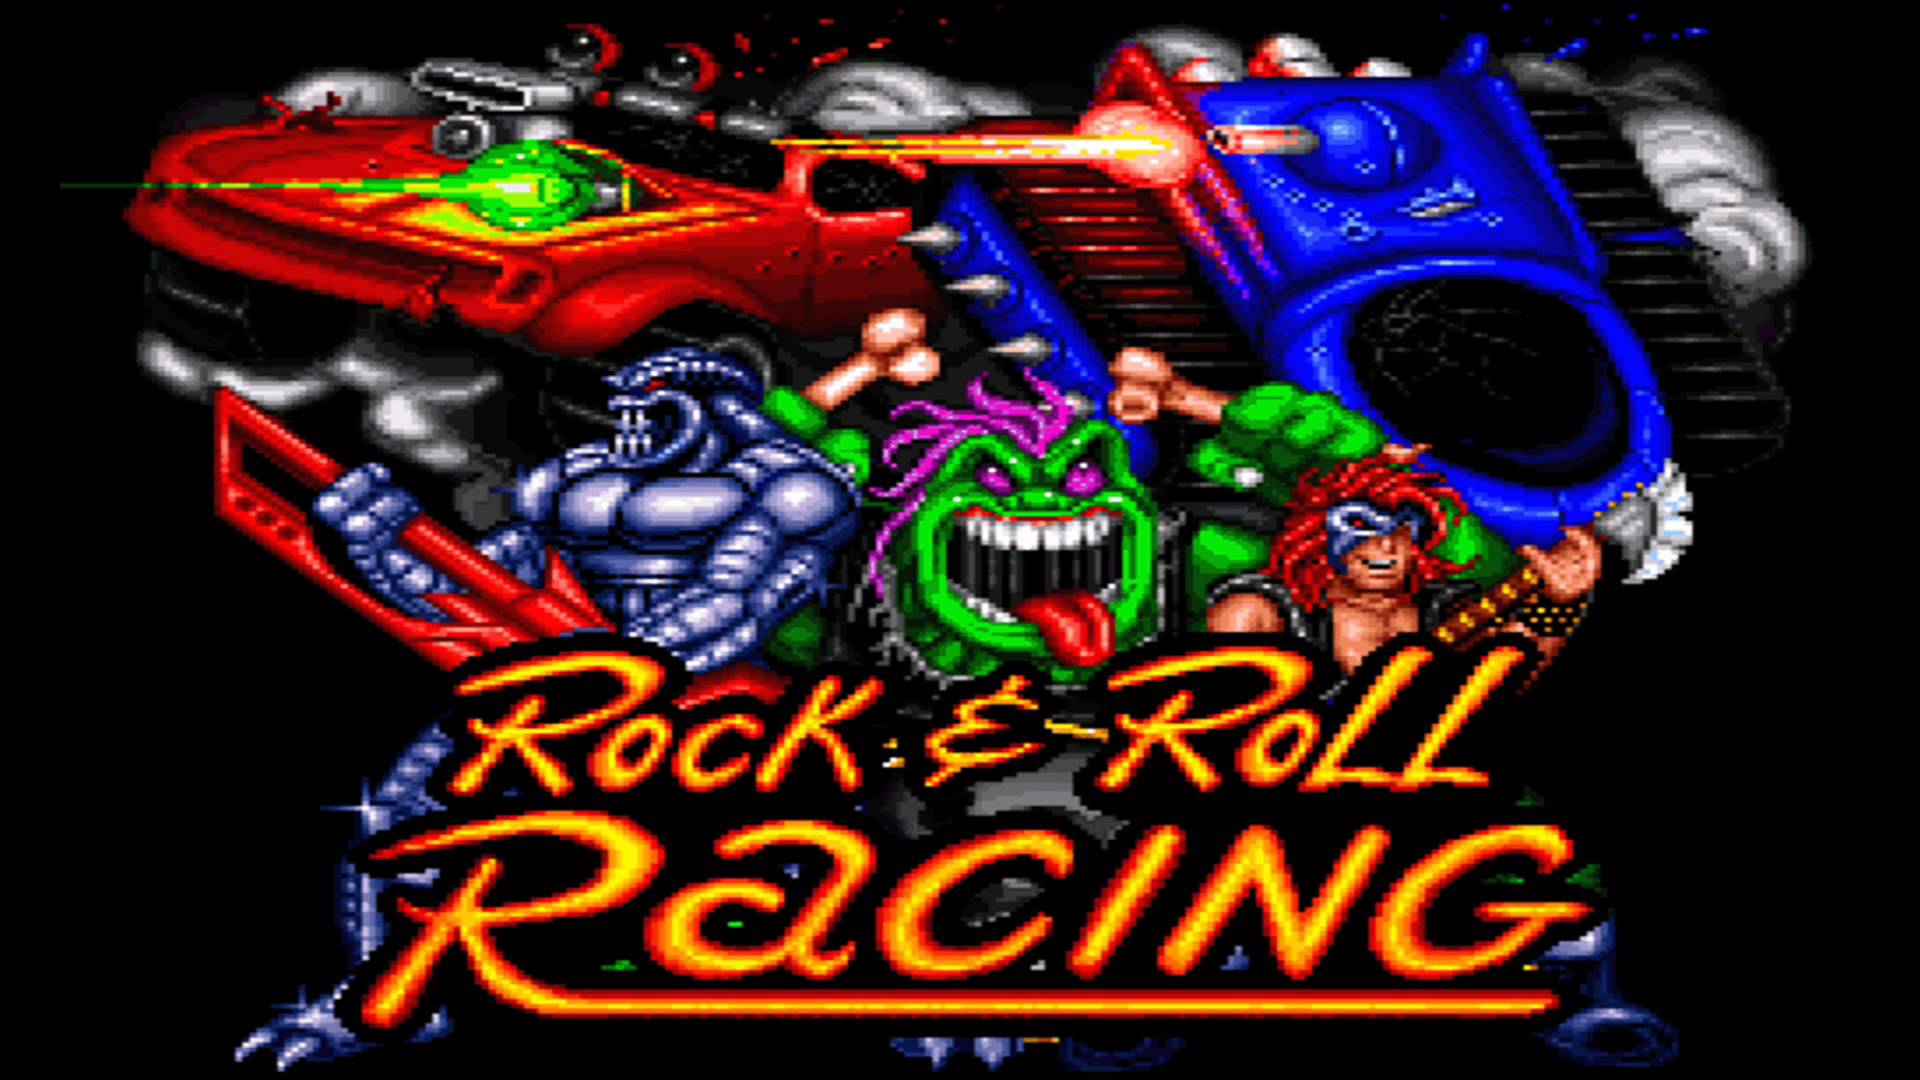 Rock and roll racing